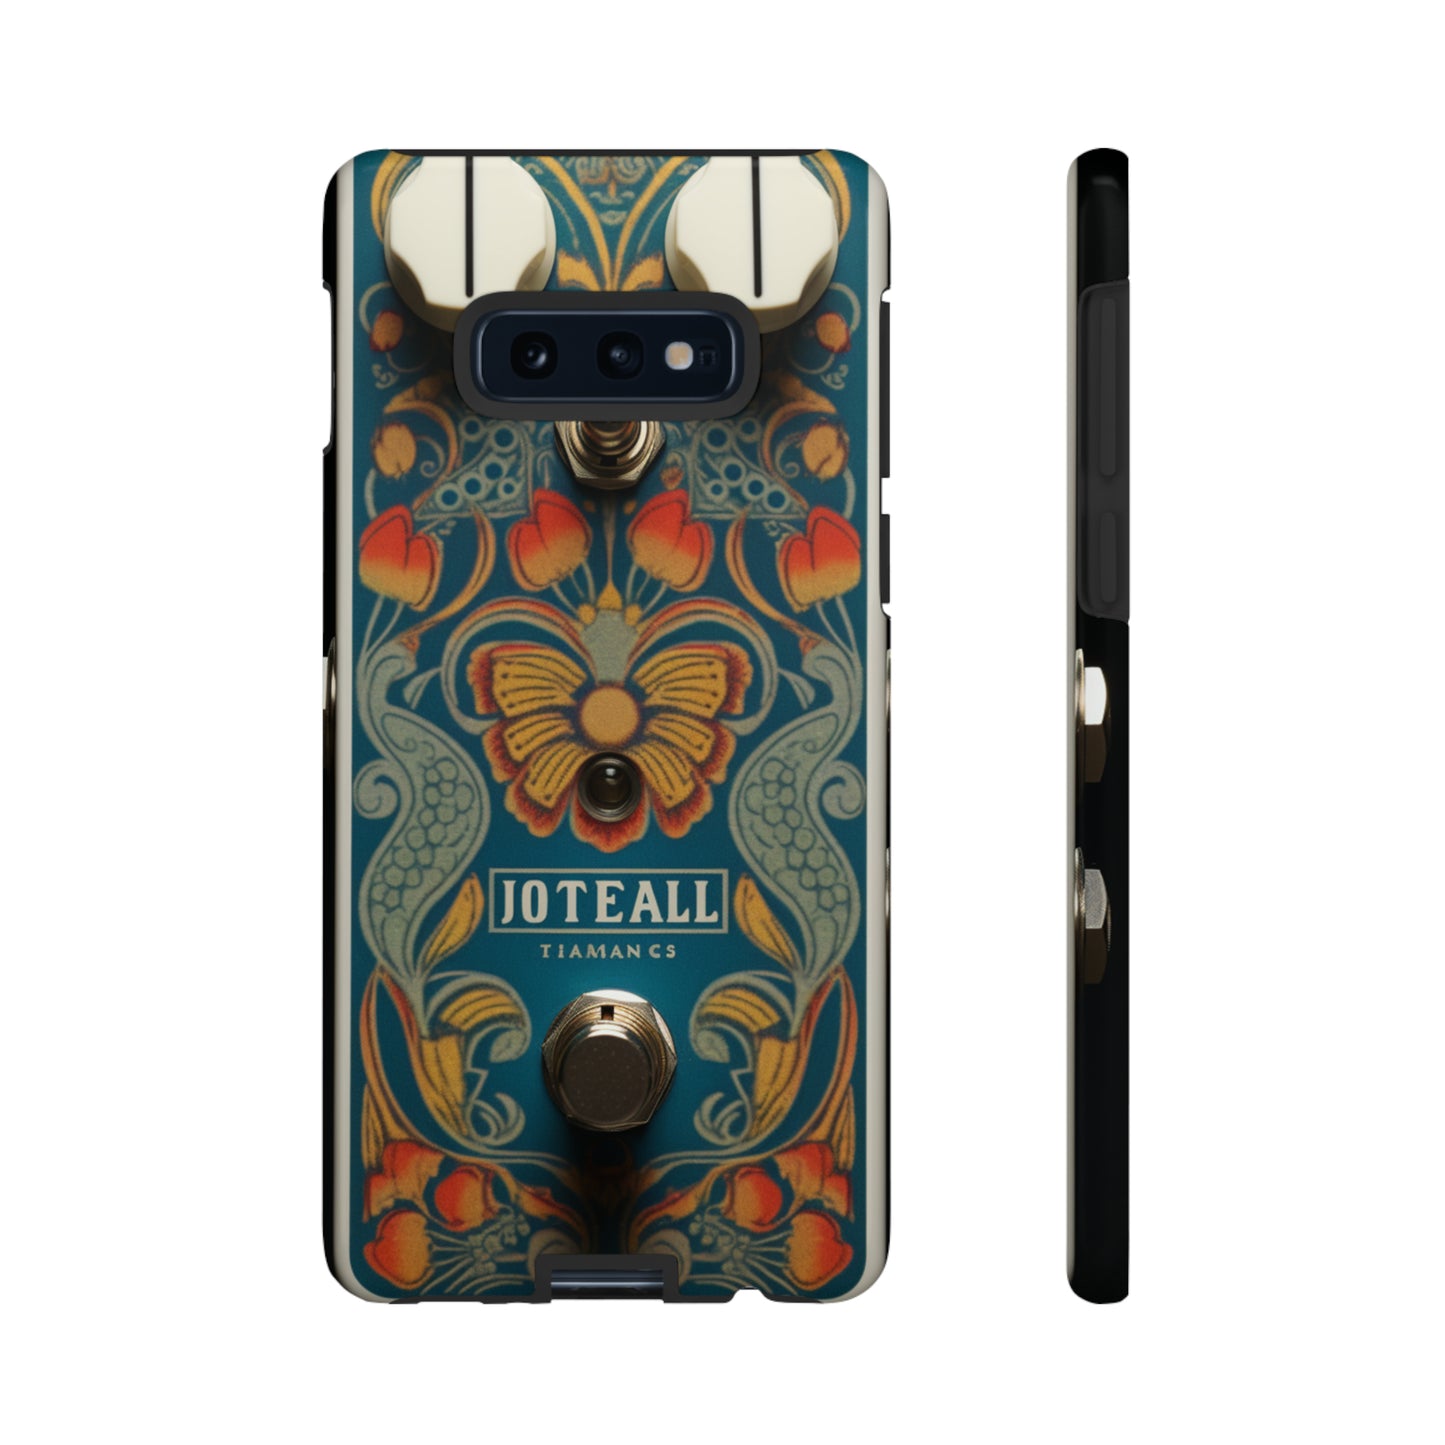 Rock 'n' Roll Guitar Pedal: Tough Phone Case | Iconic Music Style for iPhone, Samsung Galaxy, and Google Pixel